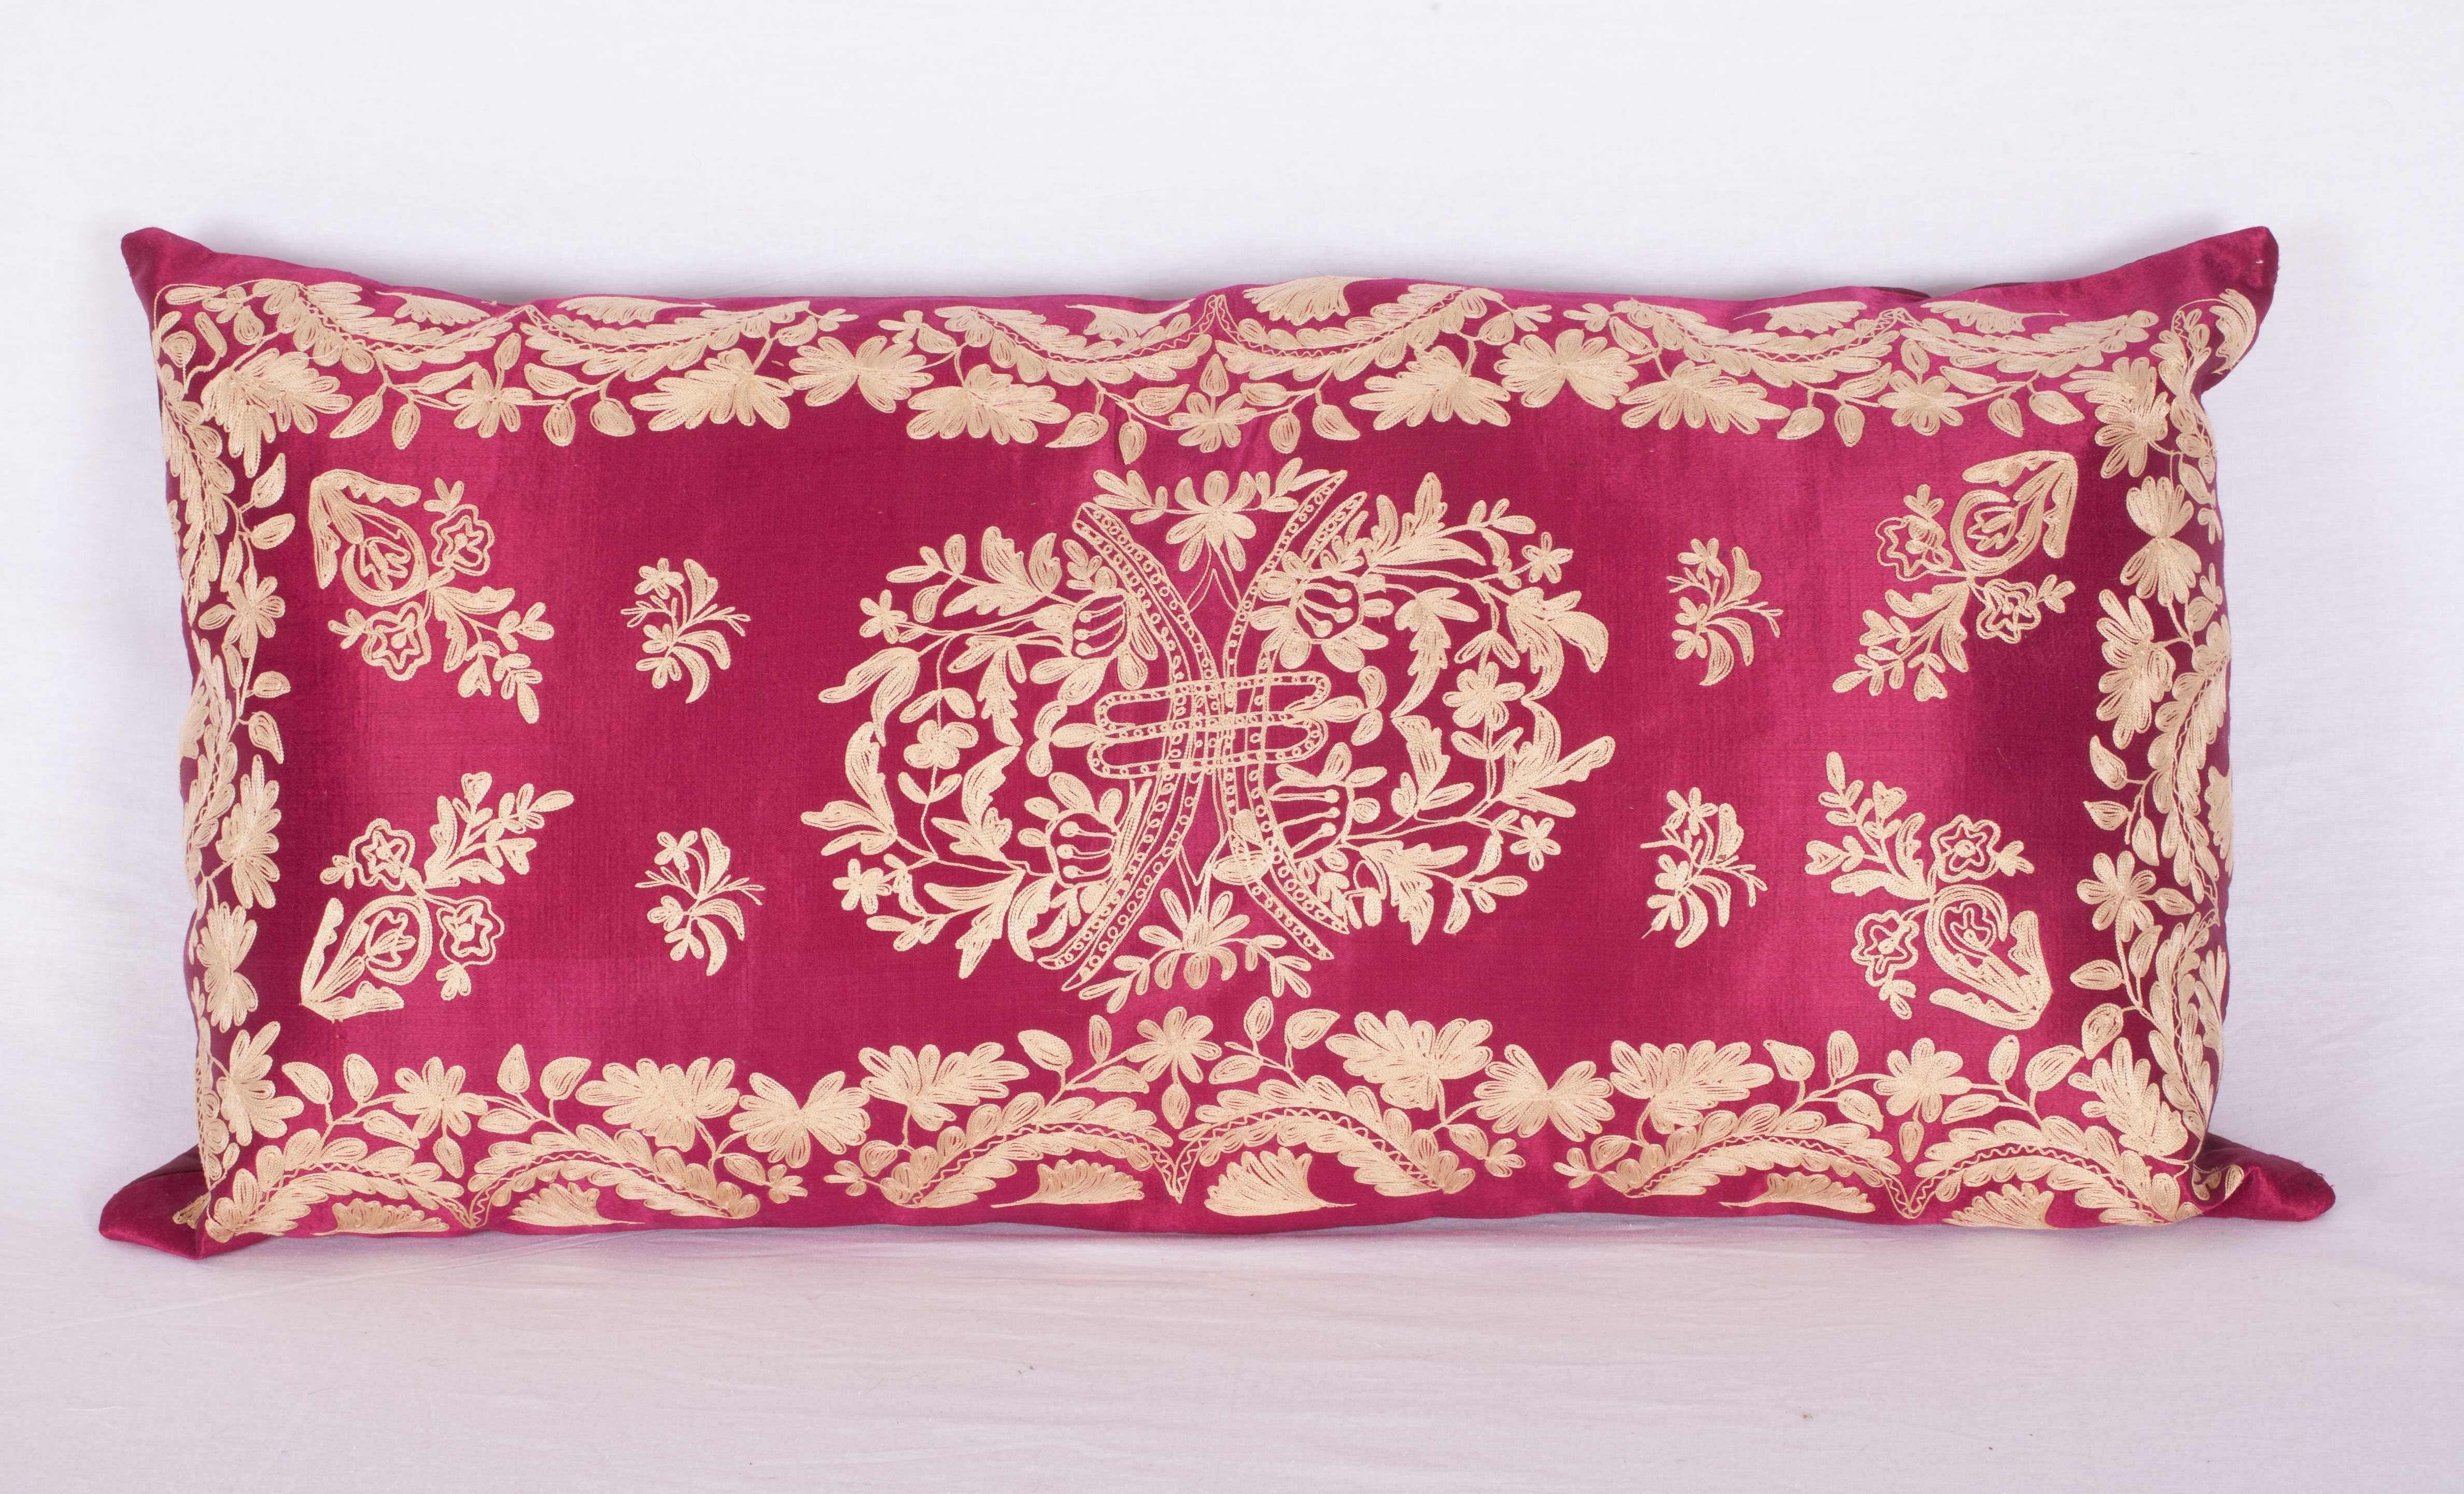 Embroidered Antique Ottoman Turkish Pillow Cases Late 19th-Early 20th Century For Sale